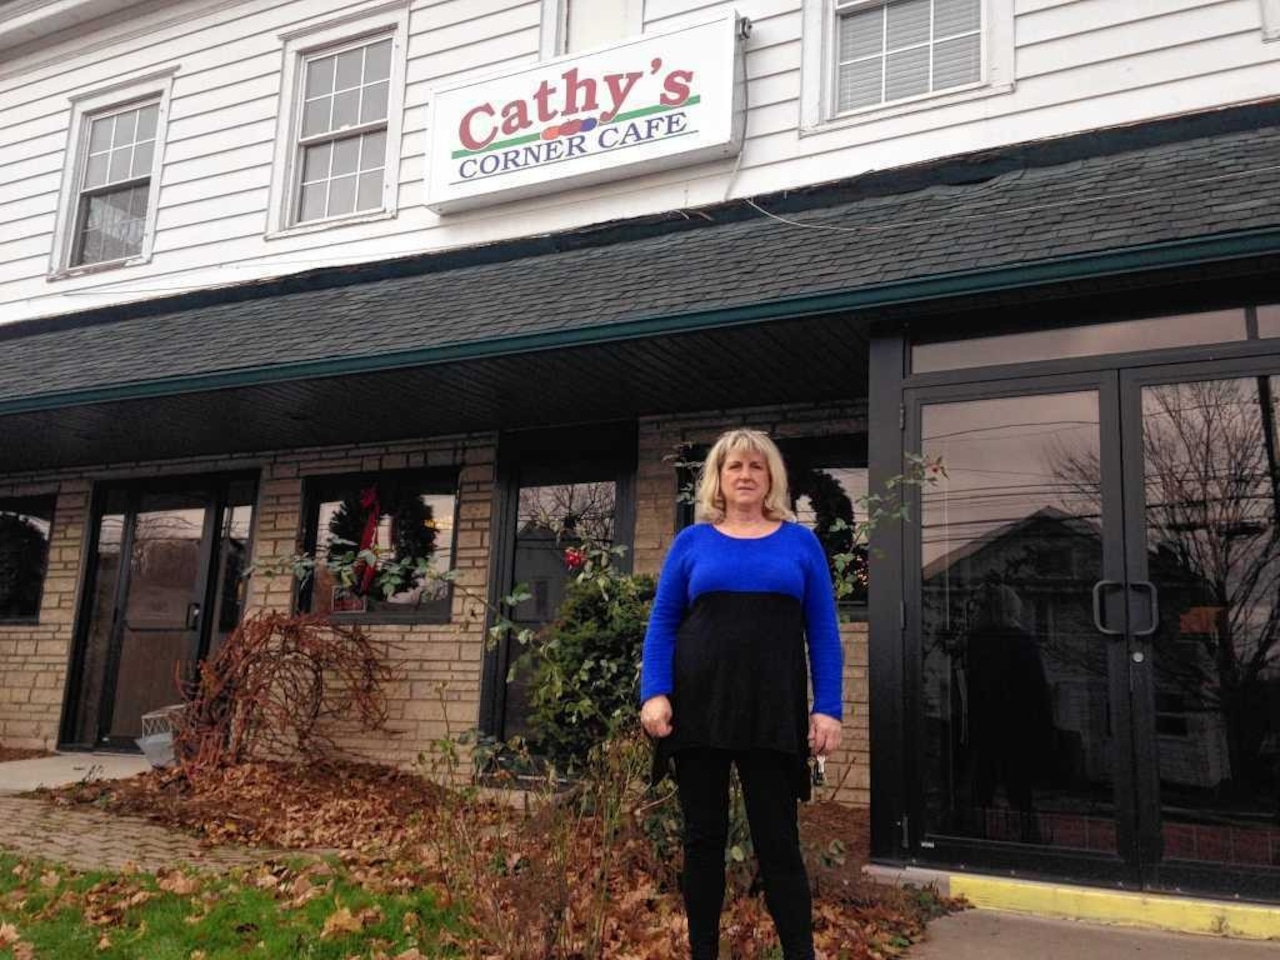 Cathy’s Corner Cafe makes a move to the former Smorol’s location in Syracuse [Video]